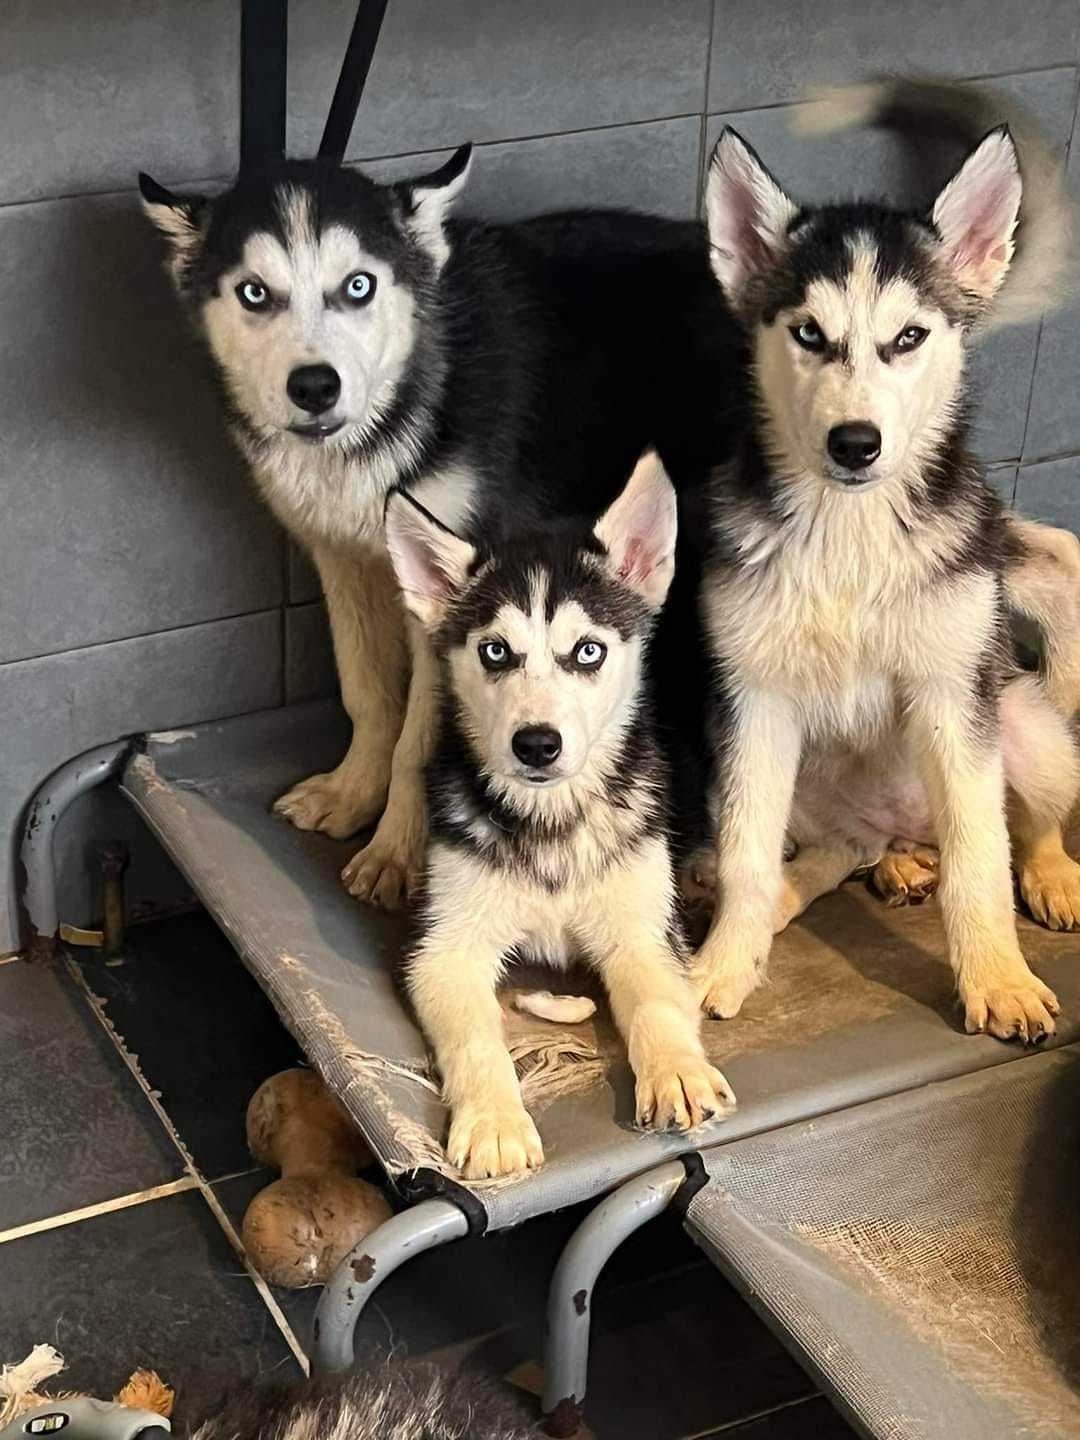 Saints Sled Dog Rescue are appealing for volunteers in Moray to foster dogs, these puppies were rehomed by the charity after being neglected by their previous owners.